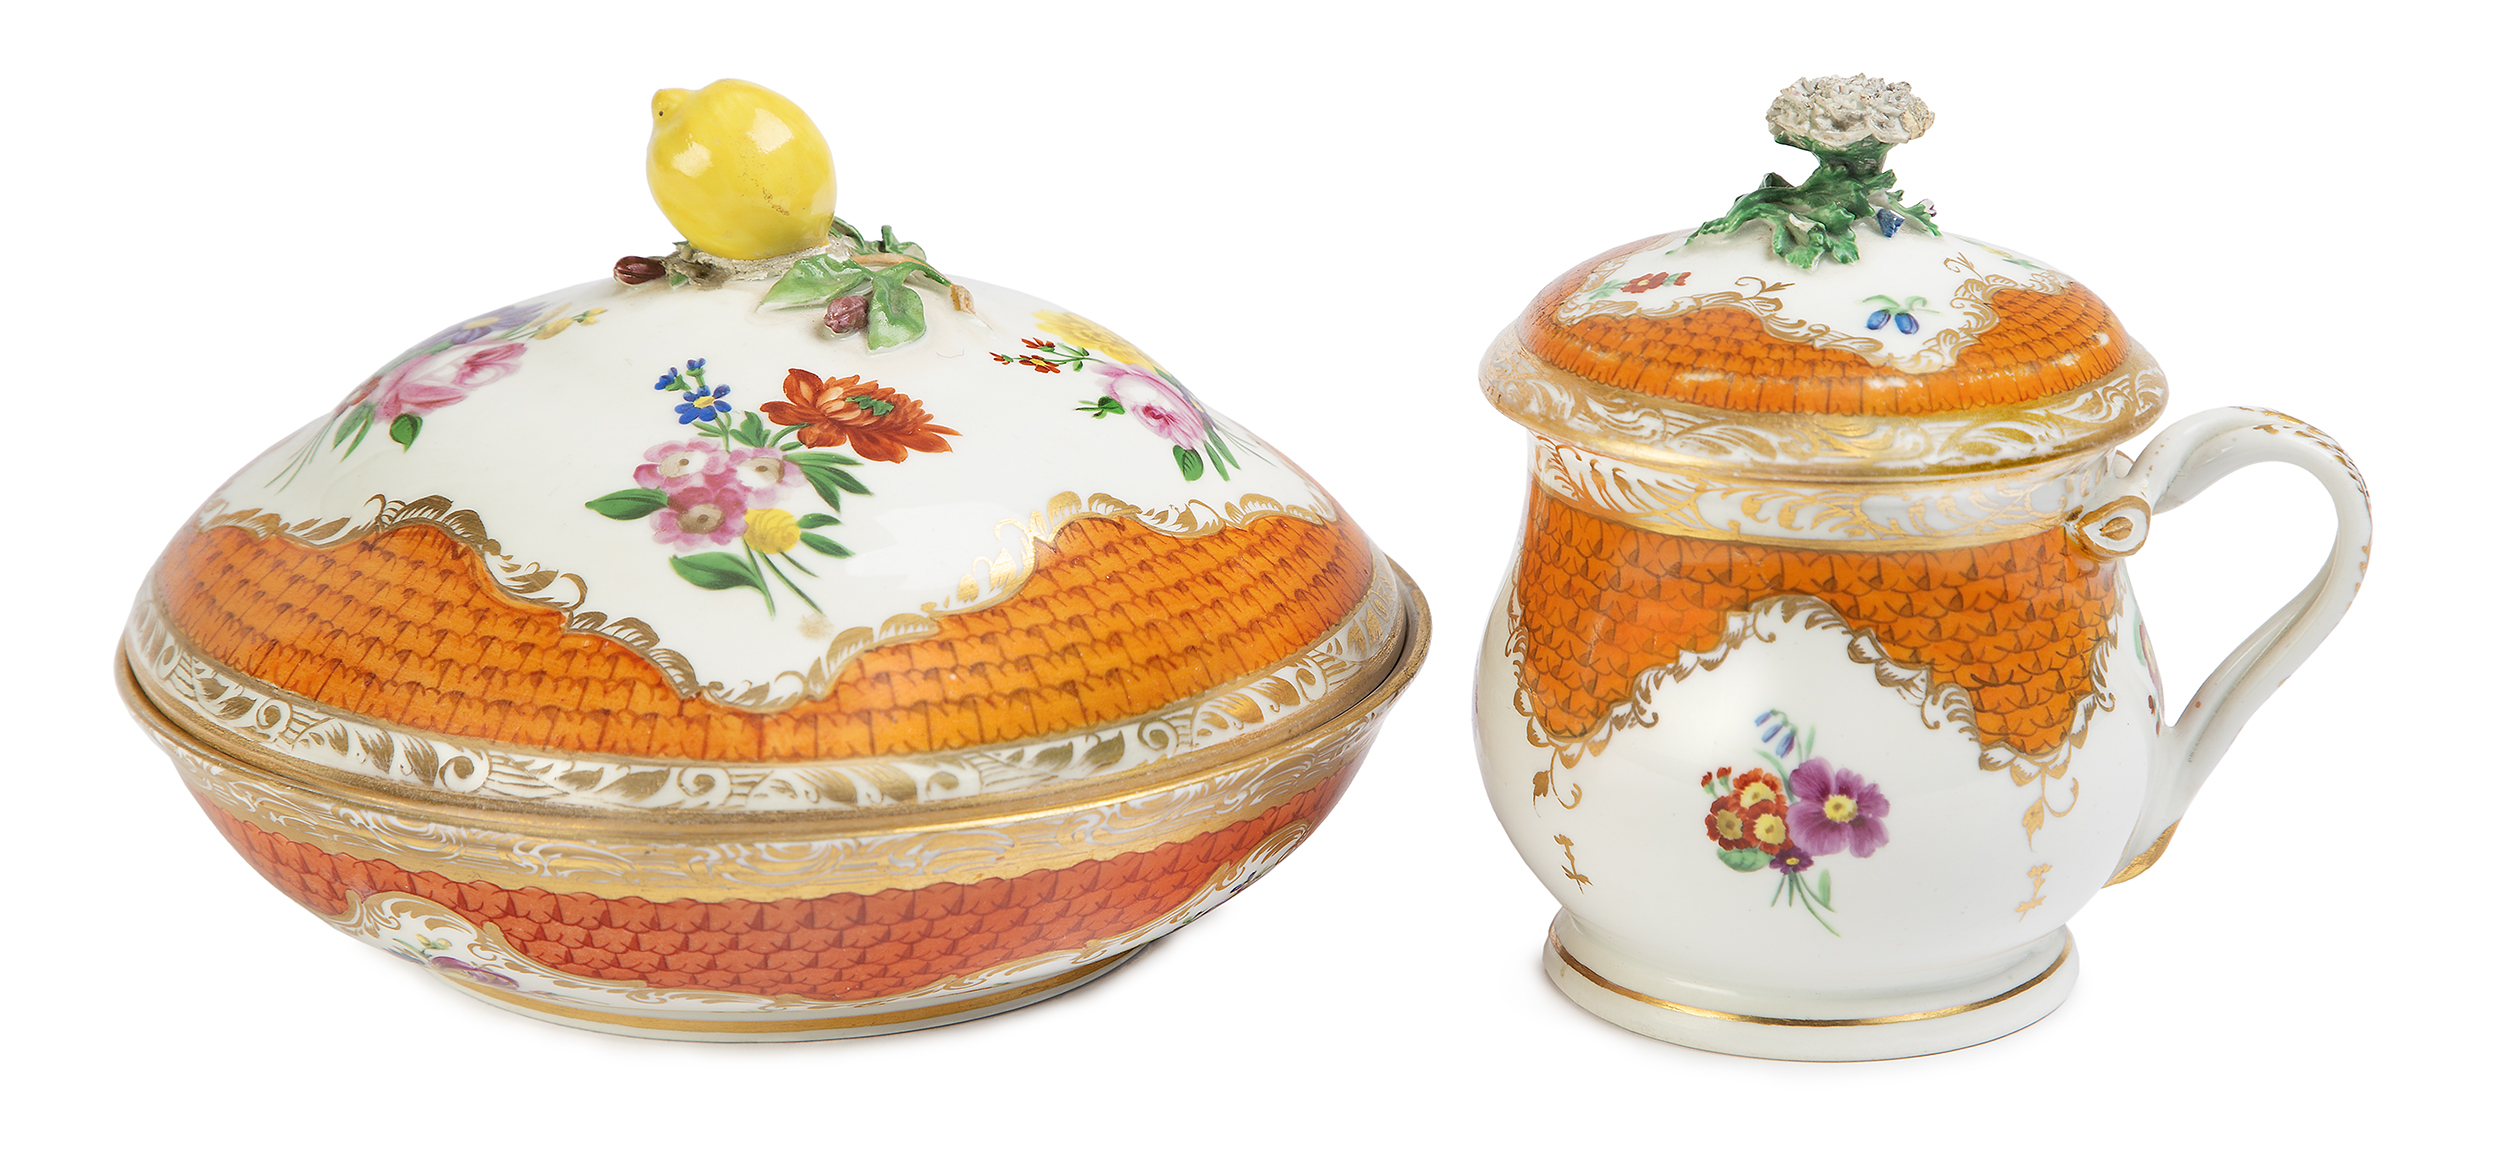 A Vienna porcelain écuelle and cover and a chocolate-cup and cover for the Turkish market, c.1800...